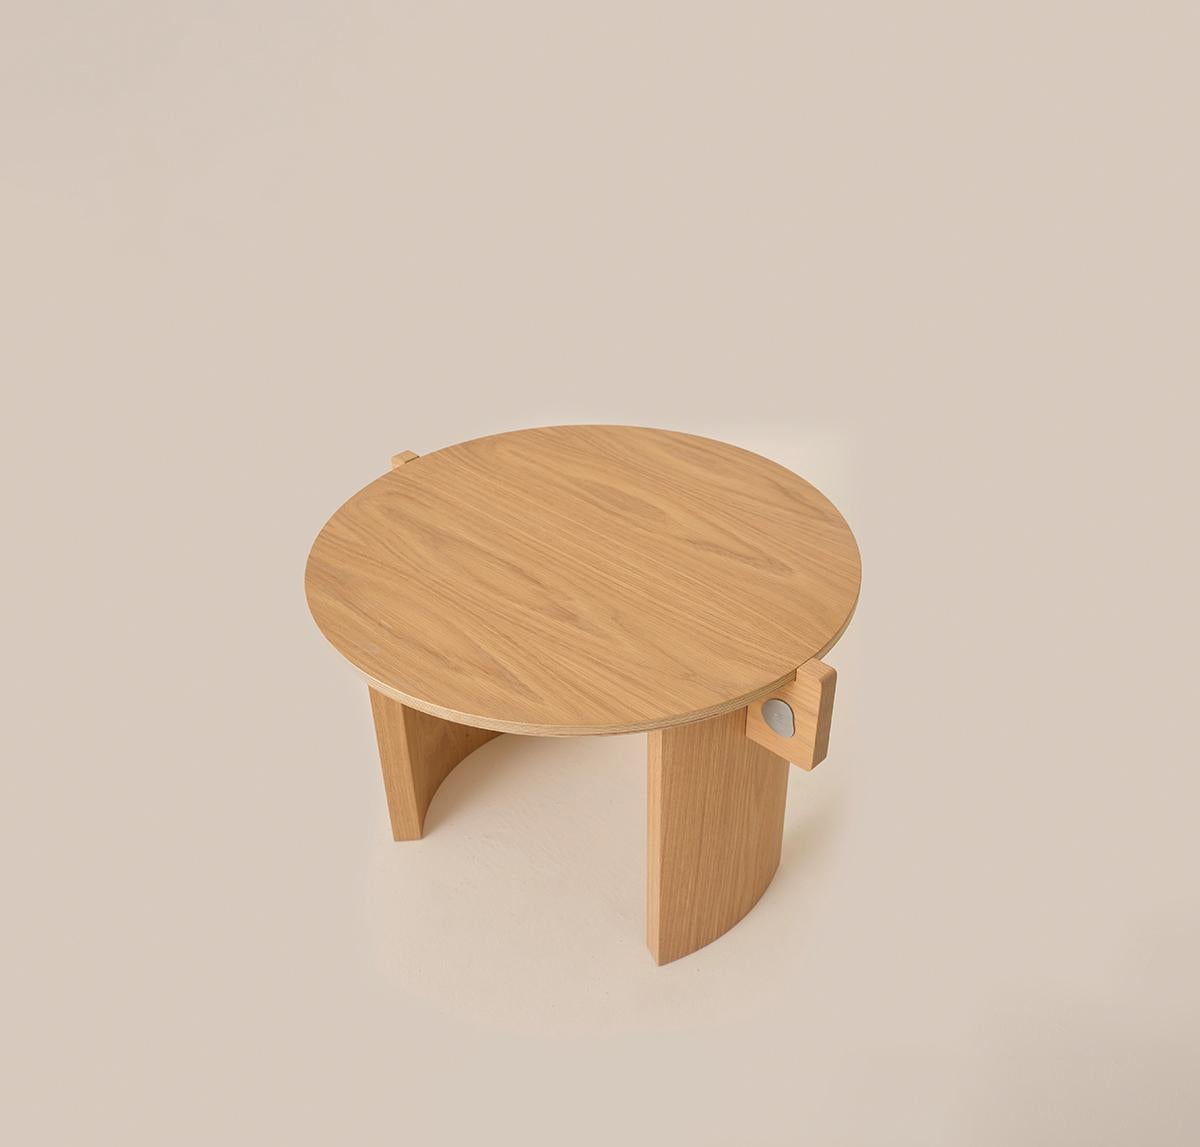 The round Flow Coffee Table Mini with rounded edges, contours its form by curved two legs closer to each other. The linear skeleton joins into the legs to create a well-proportioned base for the table top.
Crafted from oak wood, the low piece